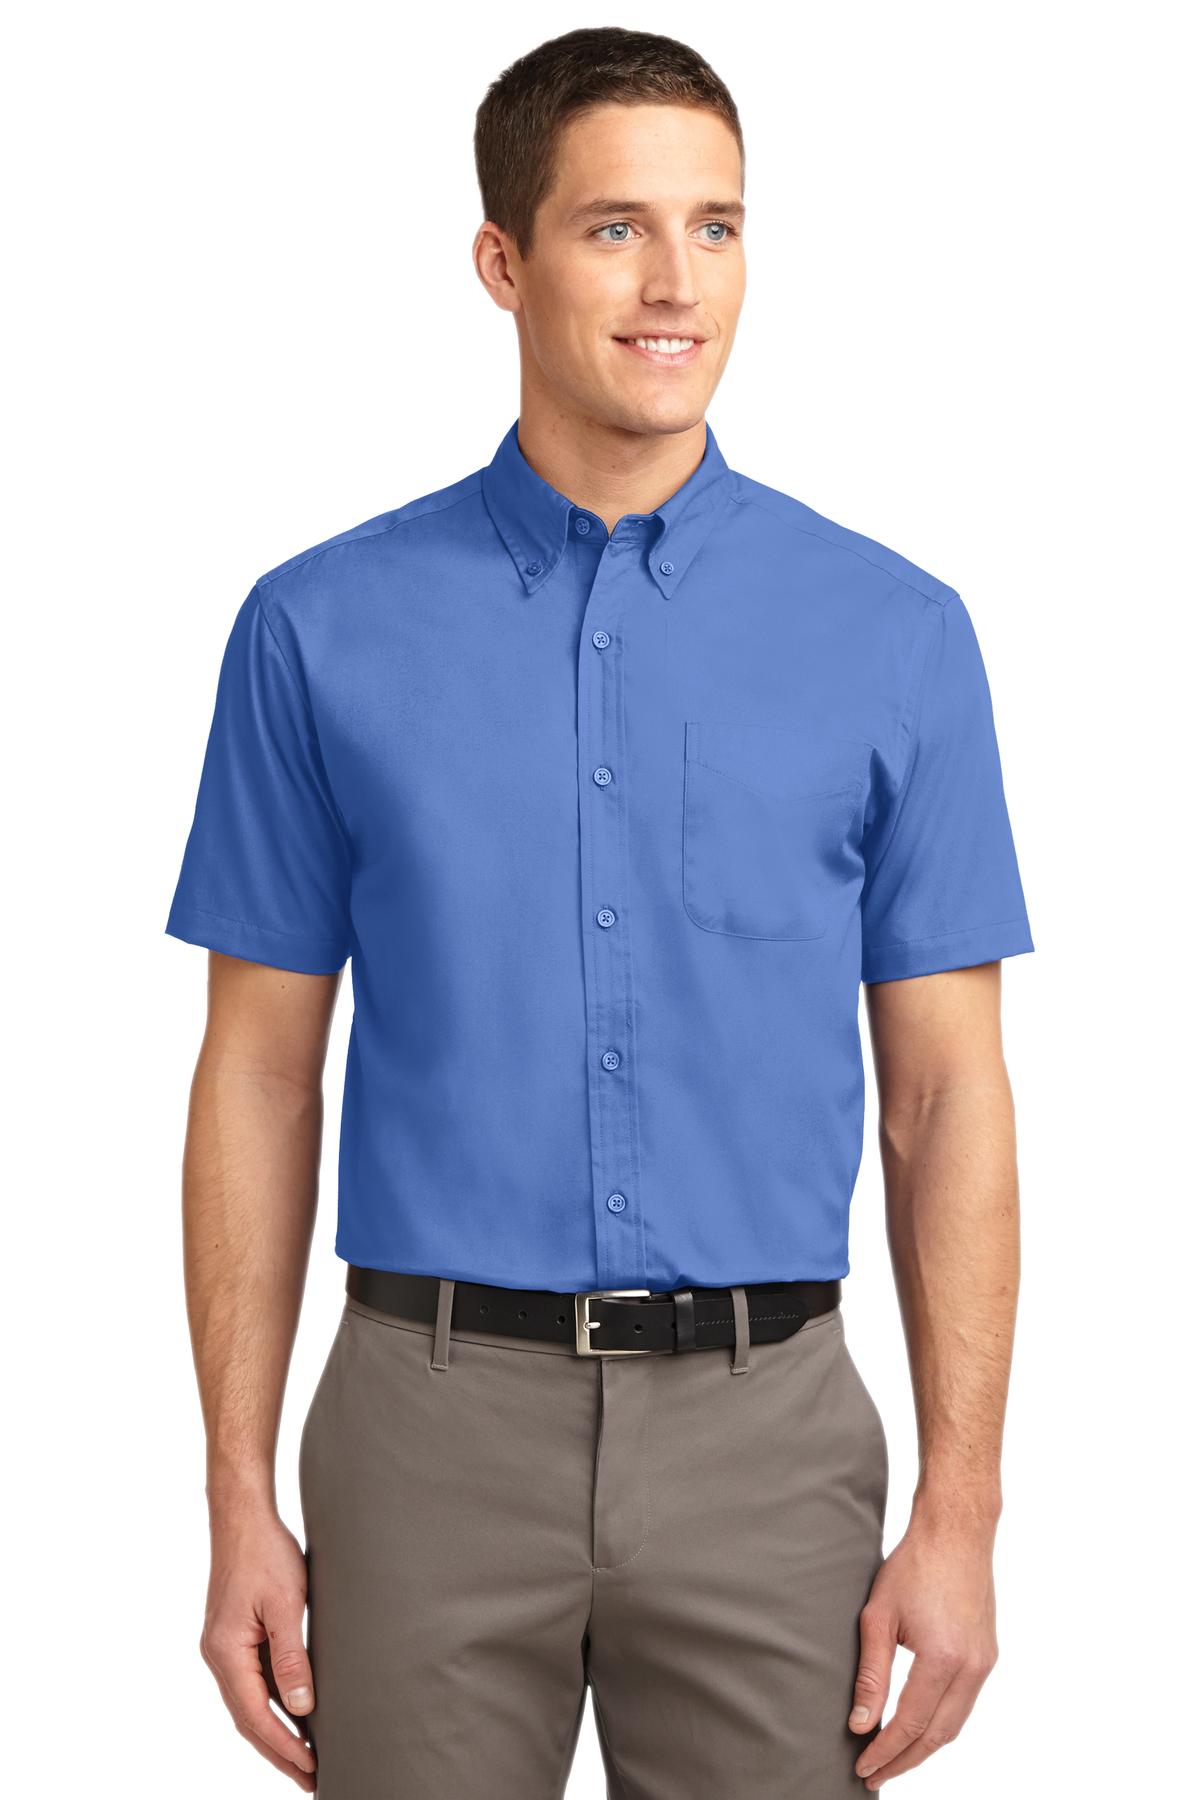 Port Authority Men's Short Sleeve Easy Care Shirt - S508 - image 1 of 1